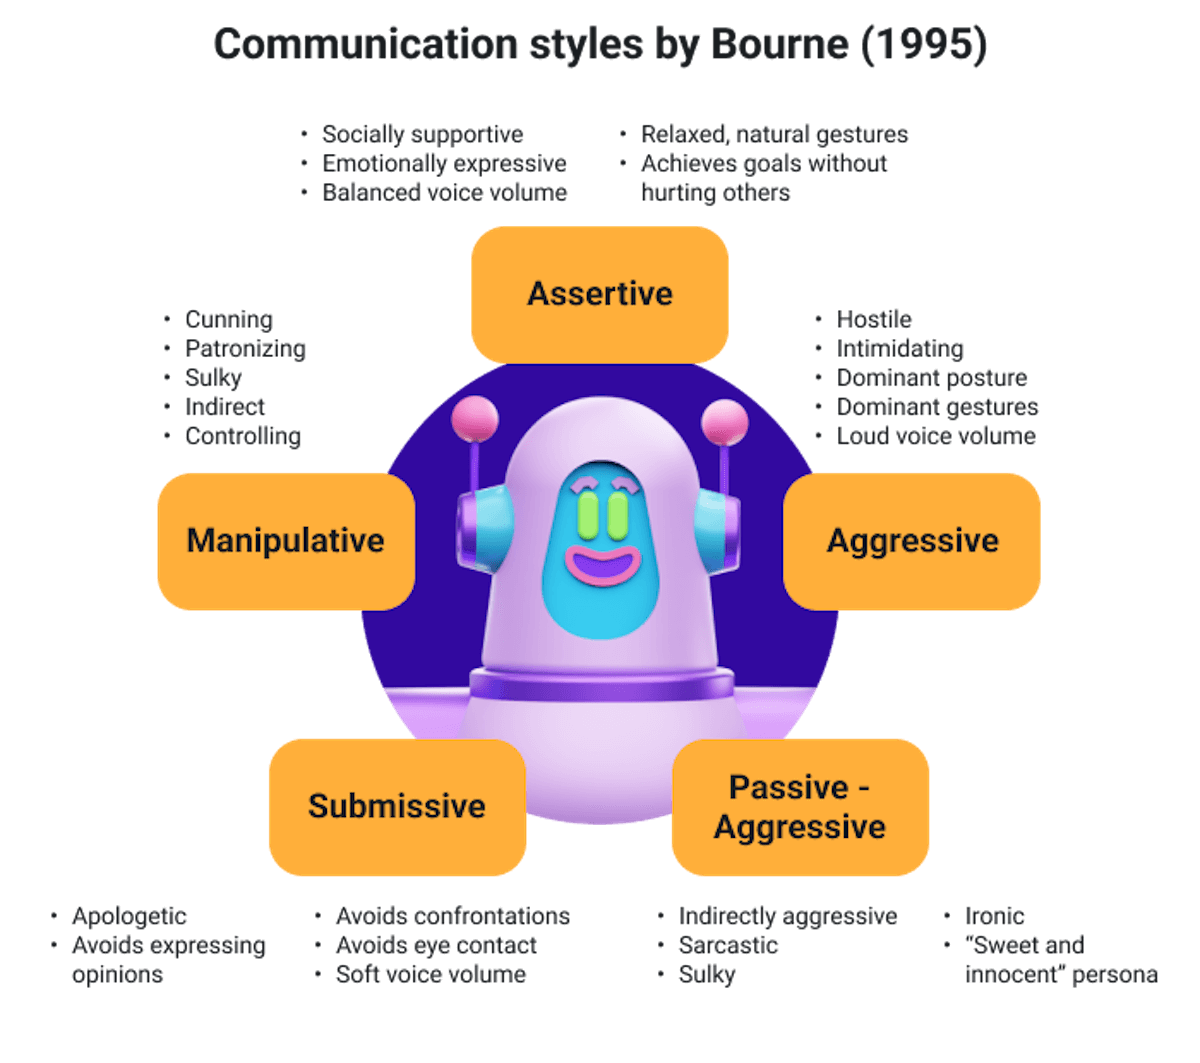 Communication styles according to Bourne